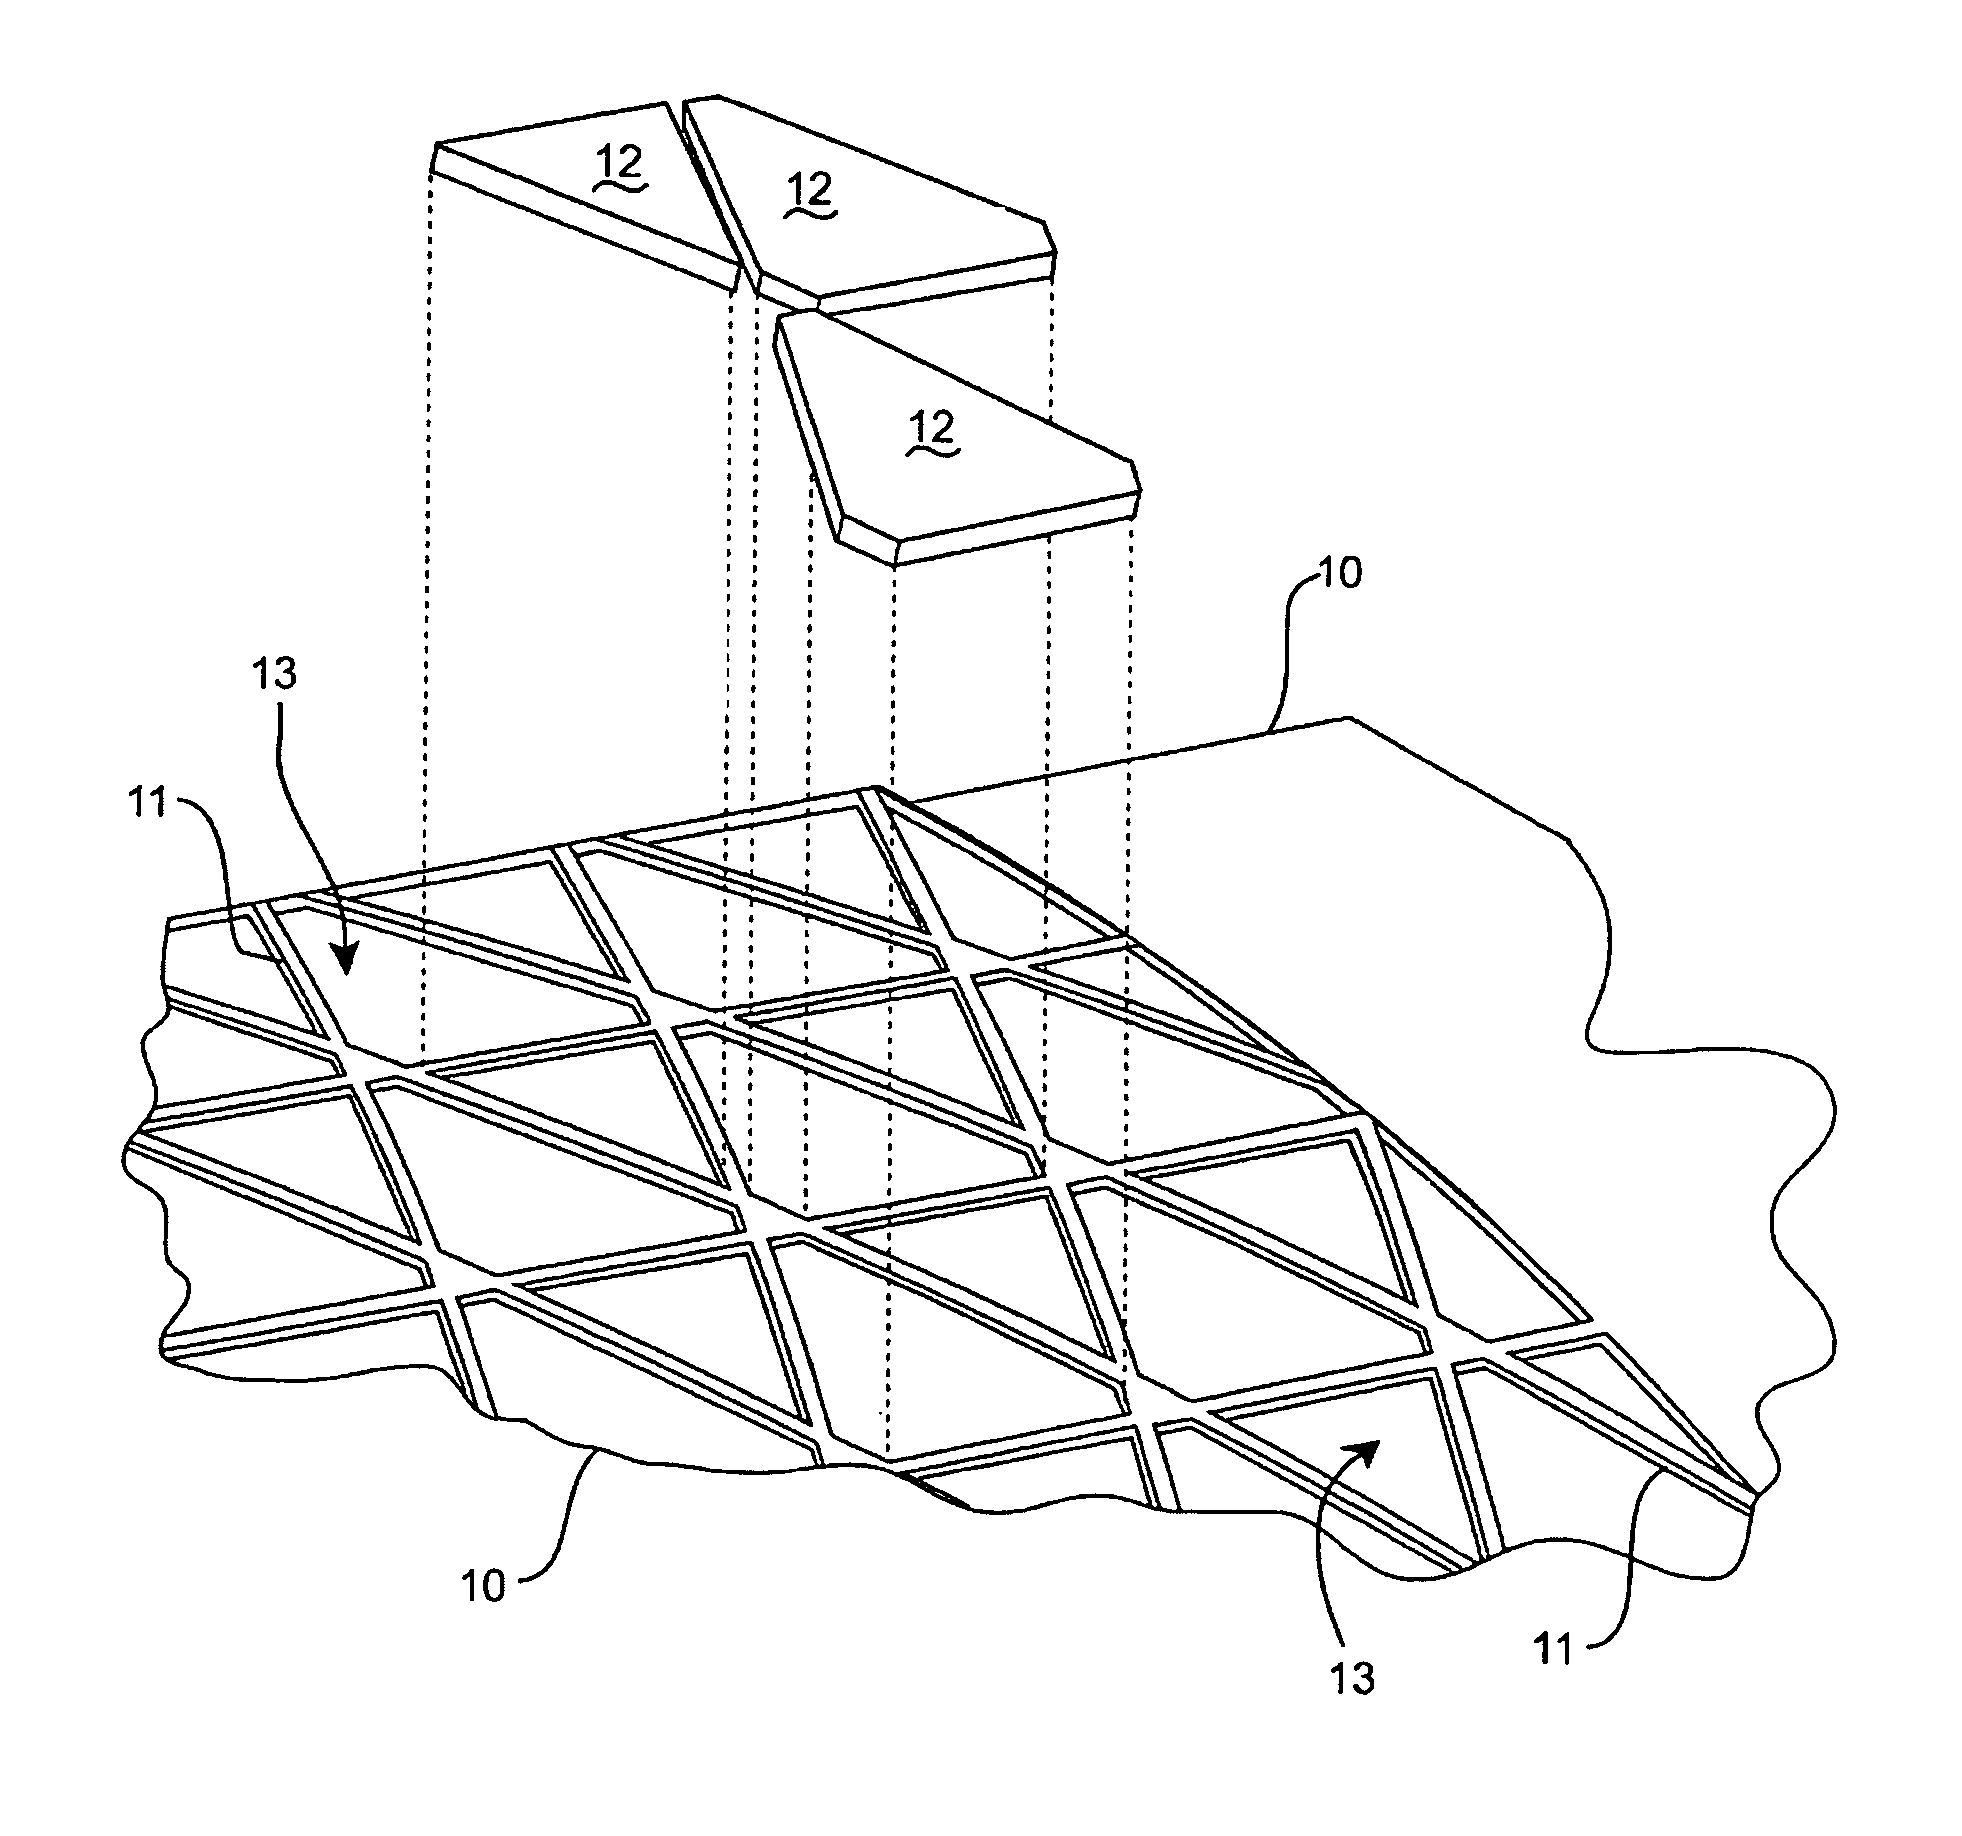 Method for fabricating grid-stiffened composite structures